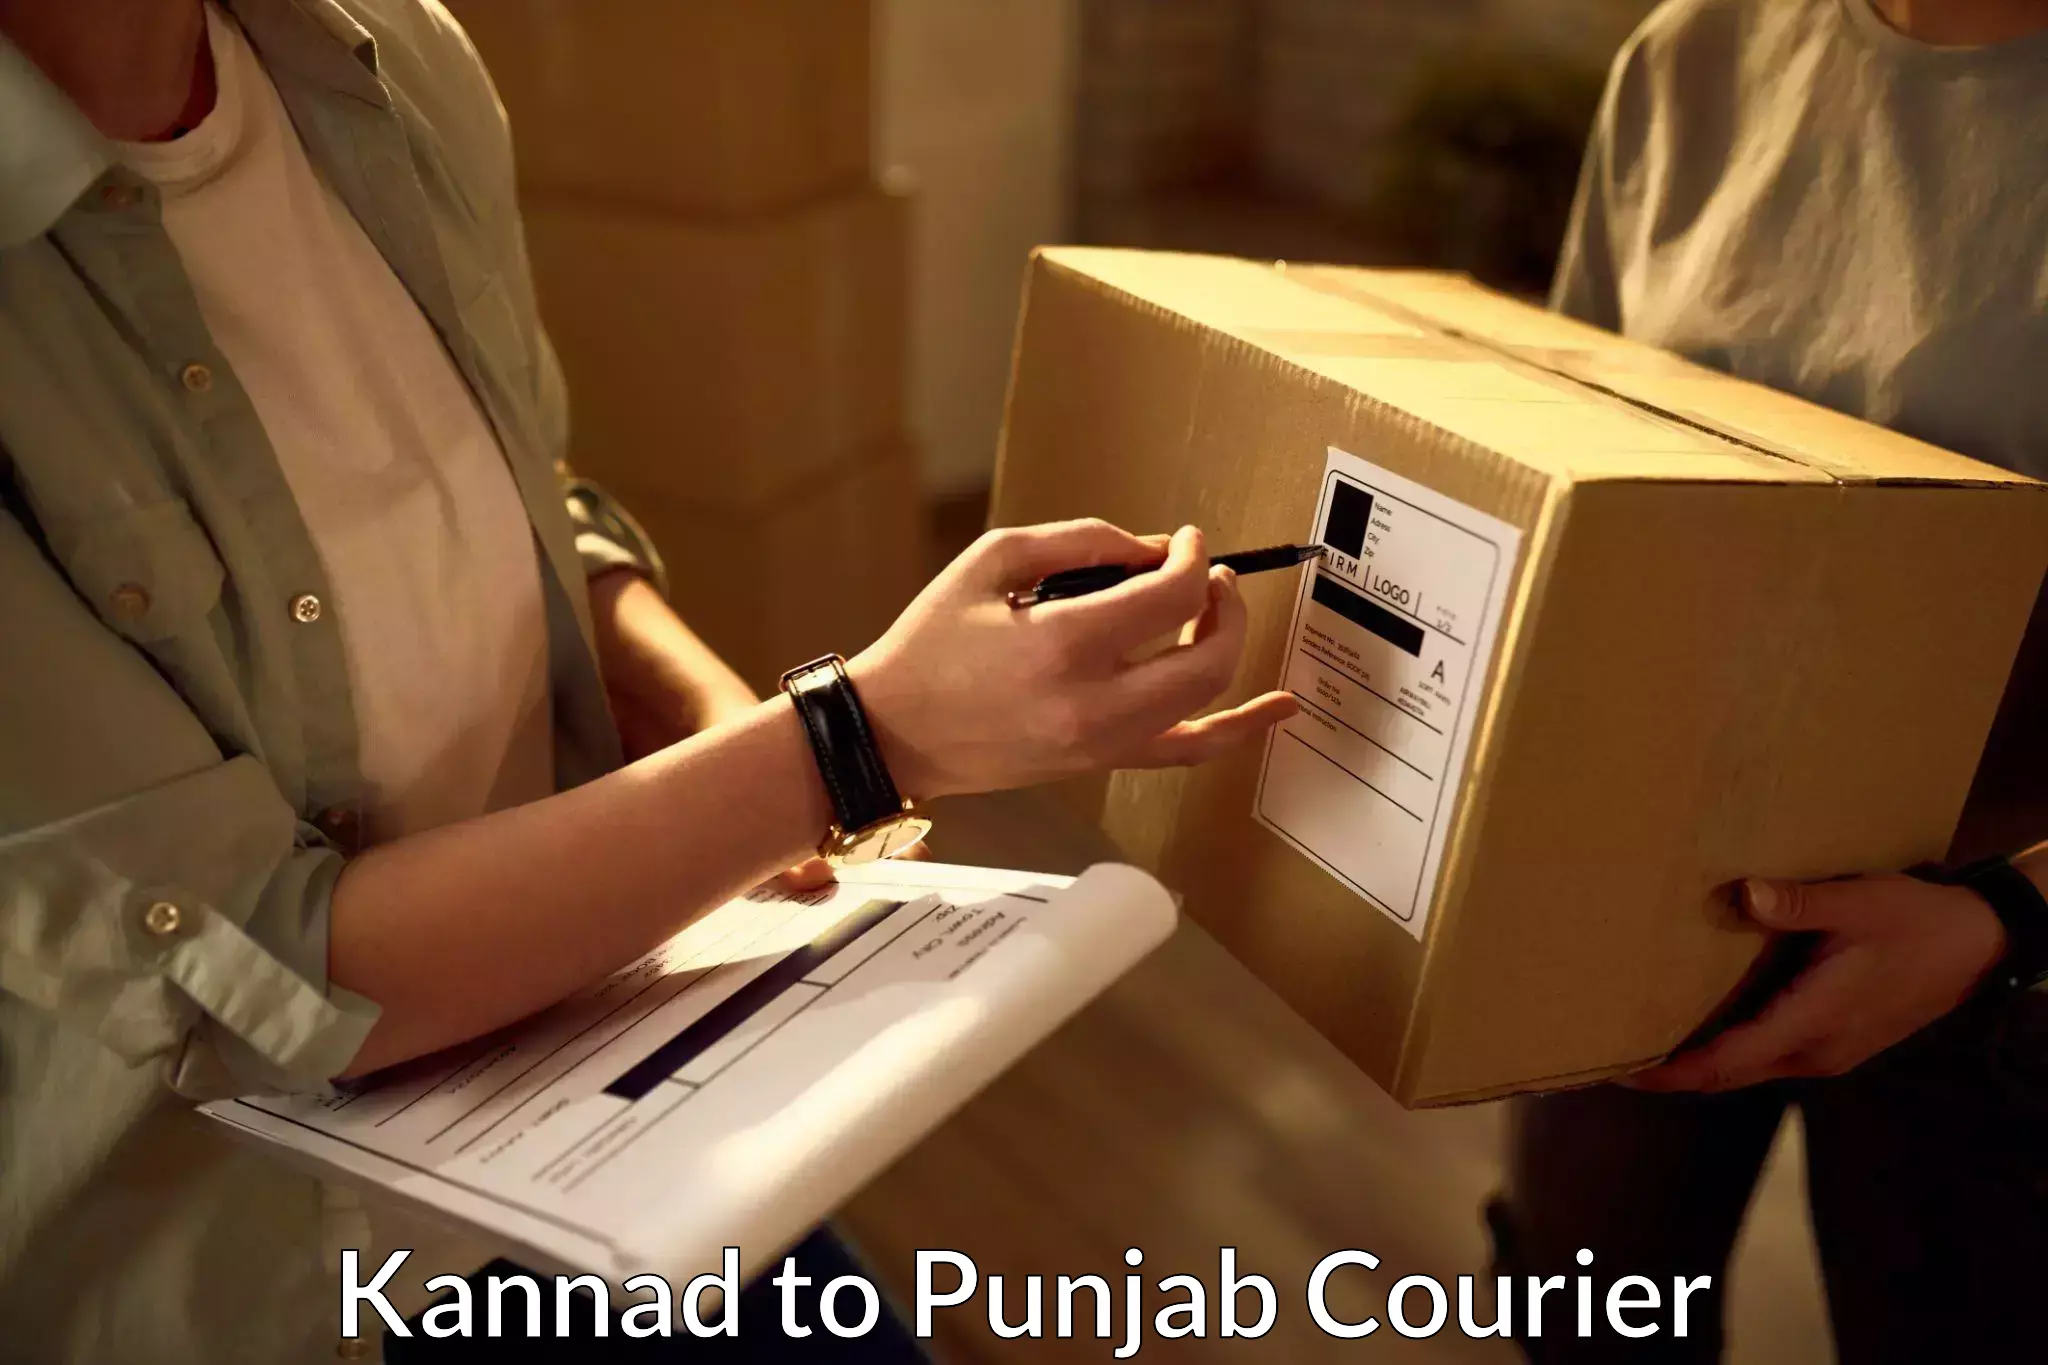 Next-day delivery options Kannad to Punjab